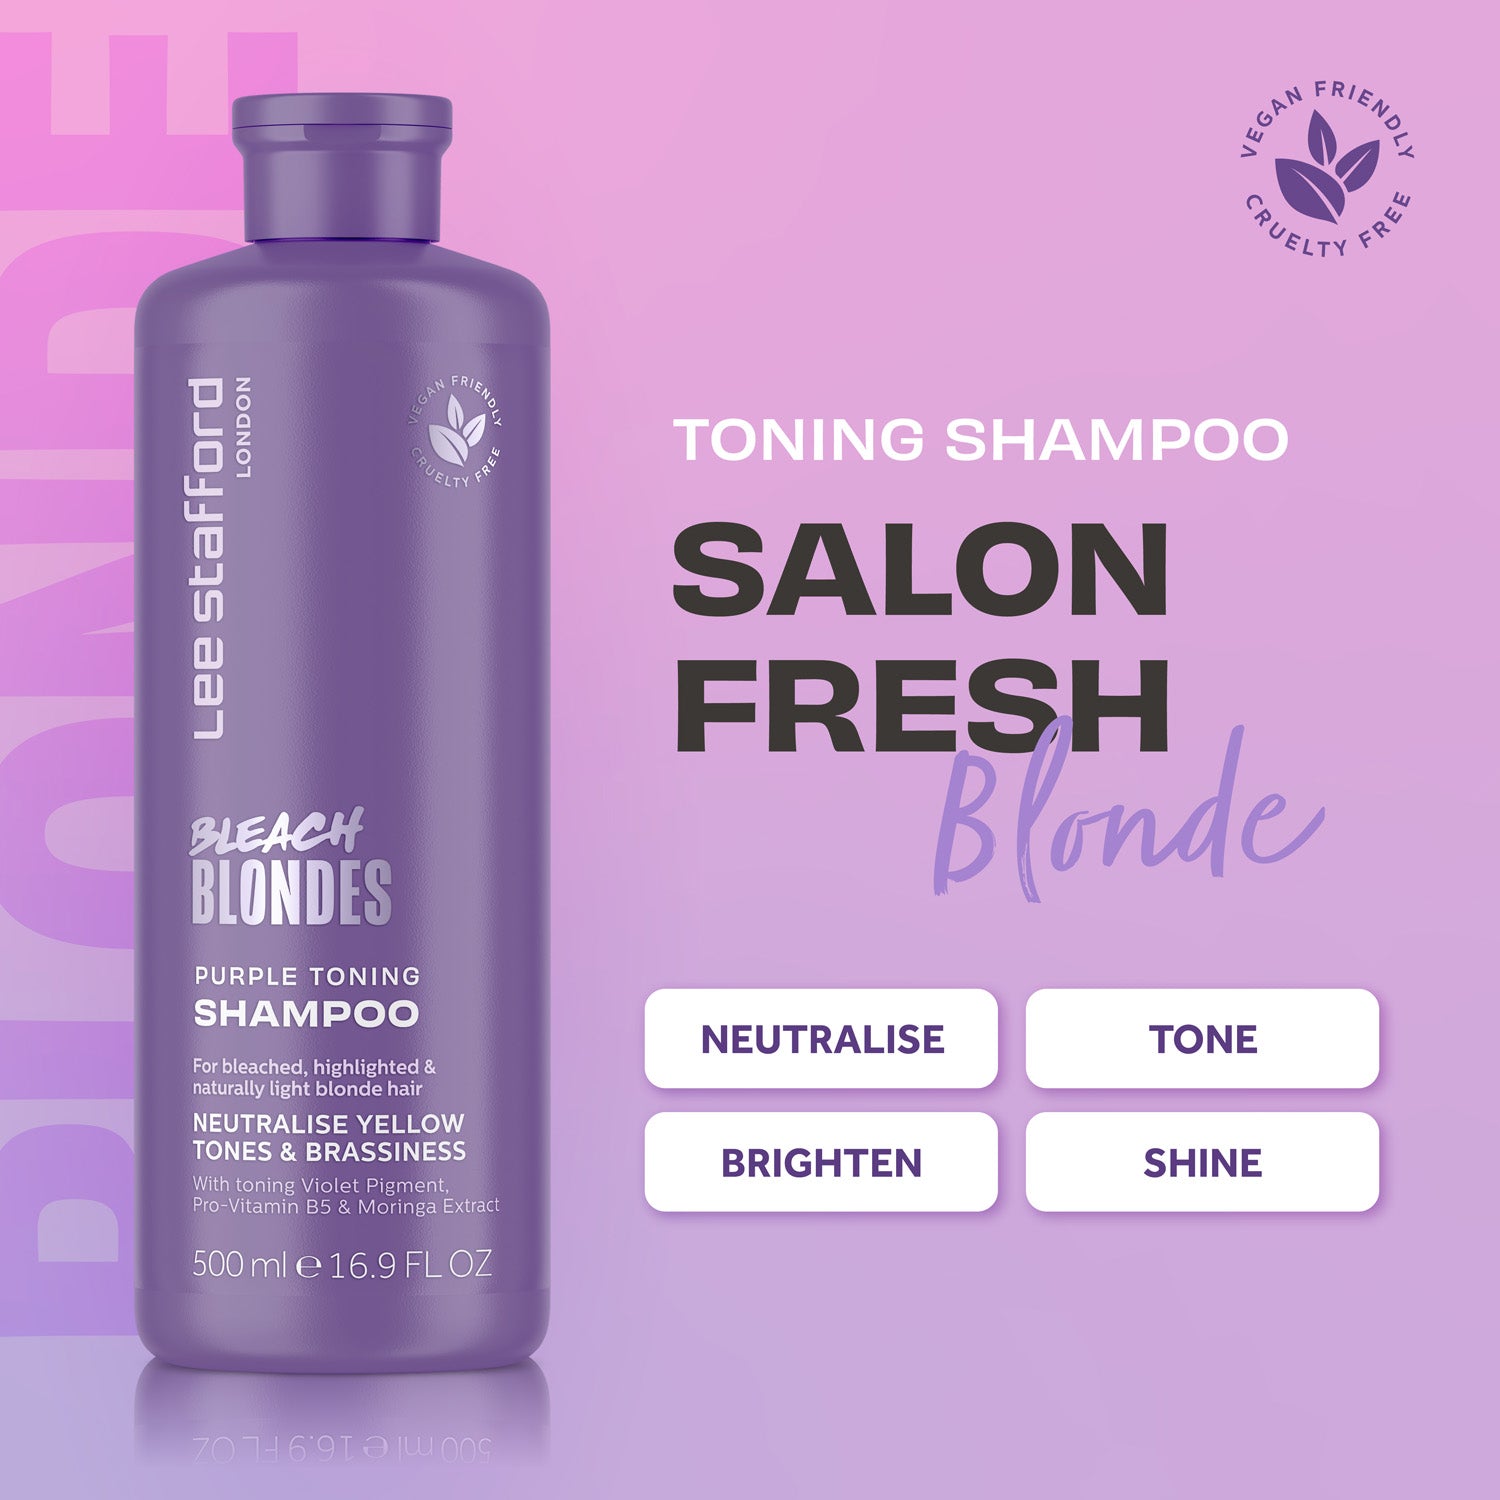 Lieferservice Lee Stafford Stafford Reign – Bleach Purple Blondes Toning US Shampoo Lee